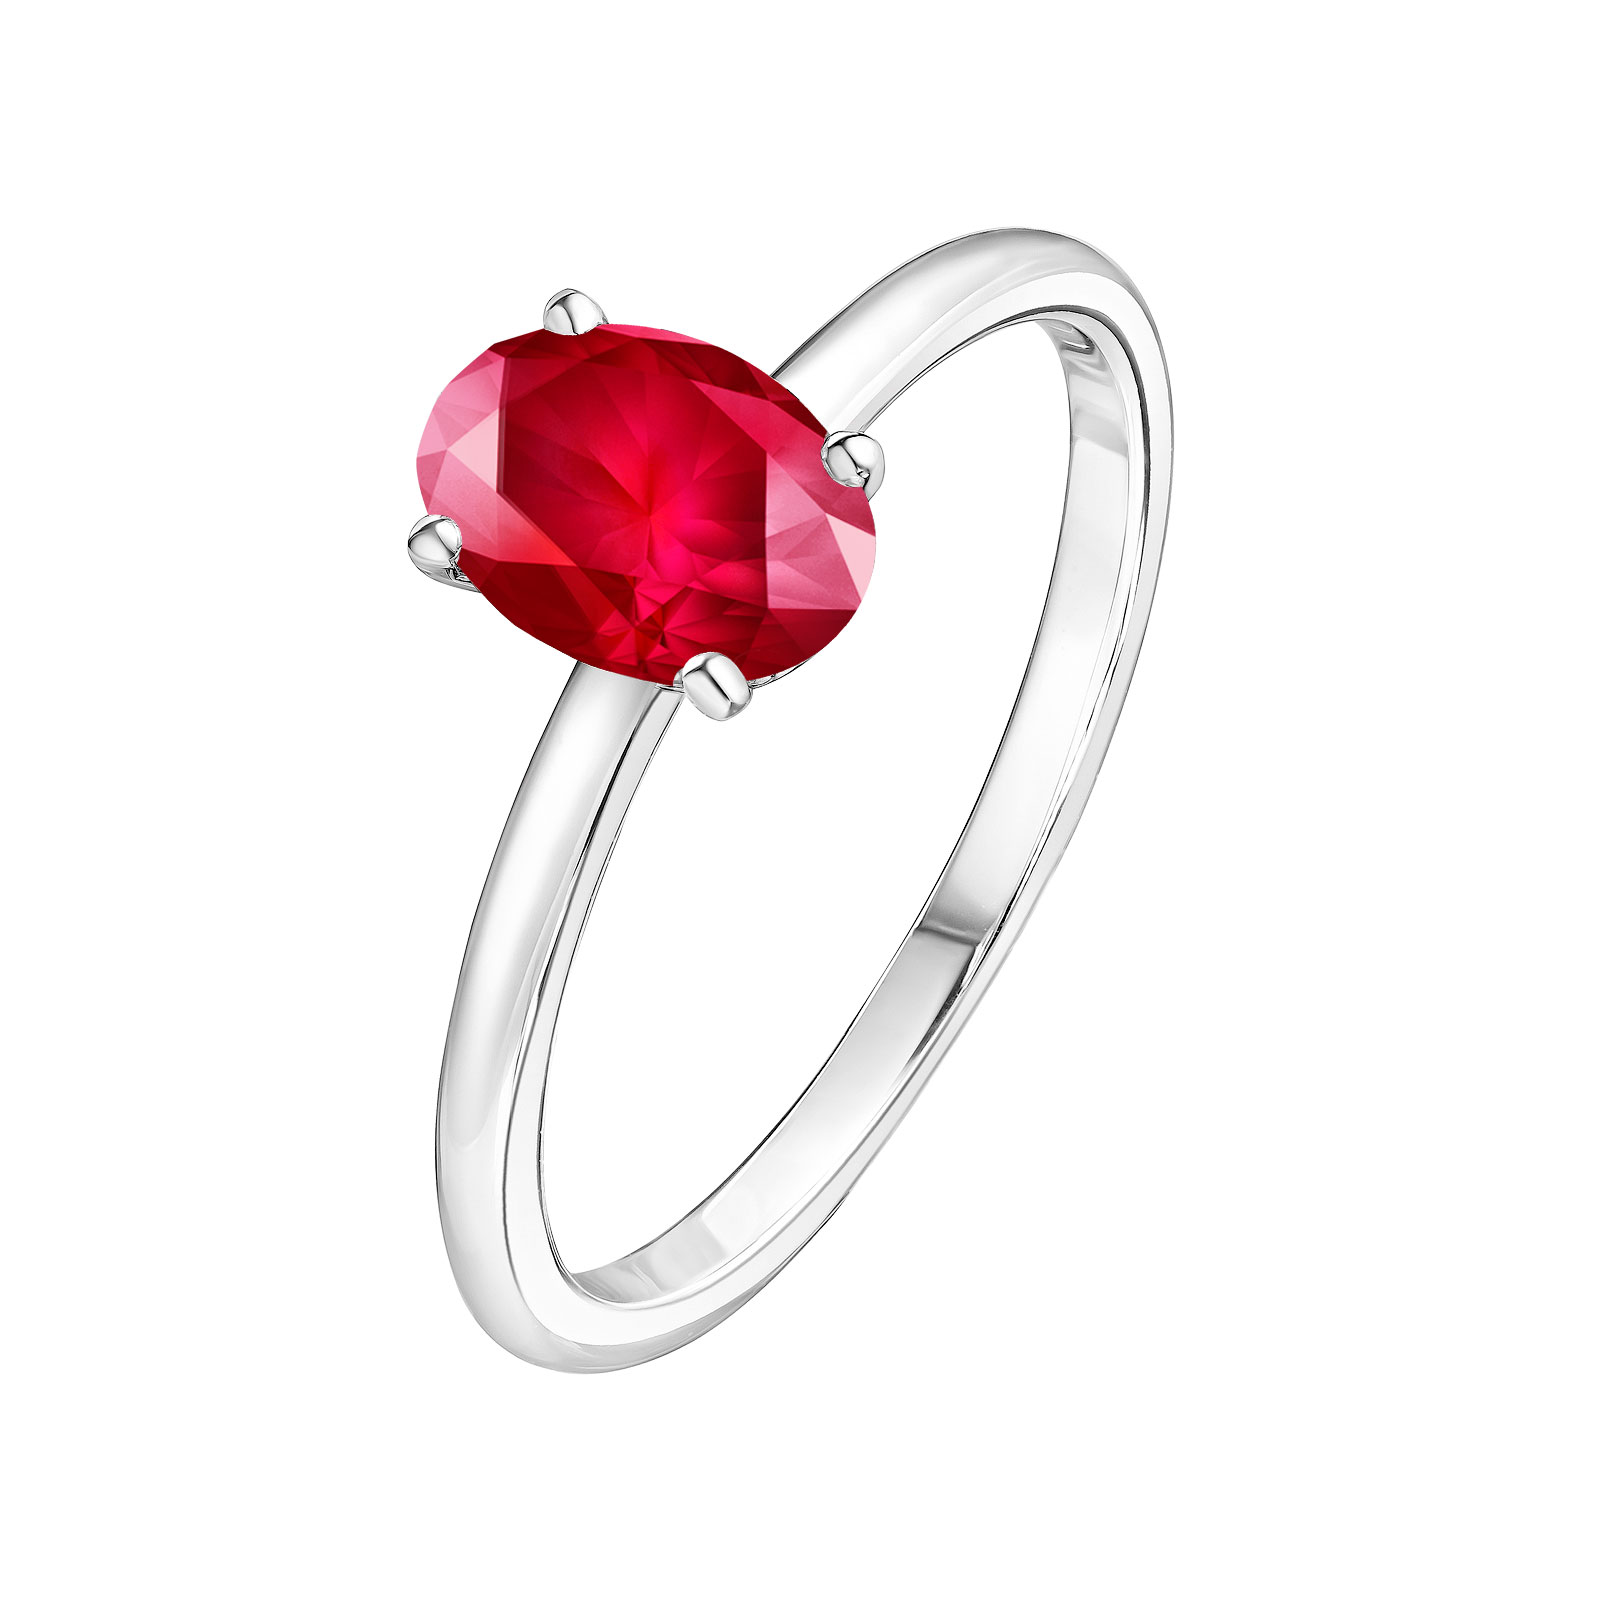 Bague Or blanc Rubis Lady Ovale 1